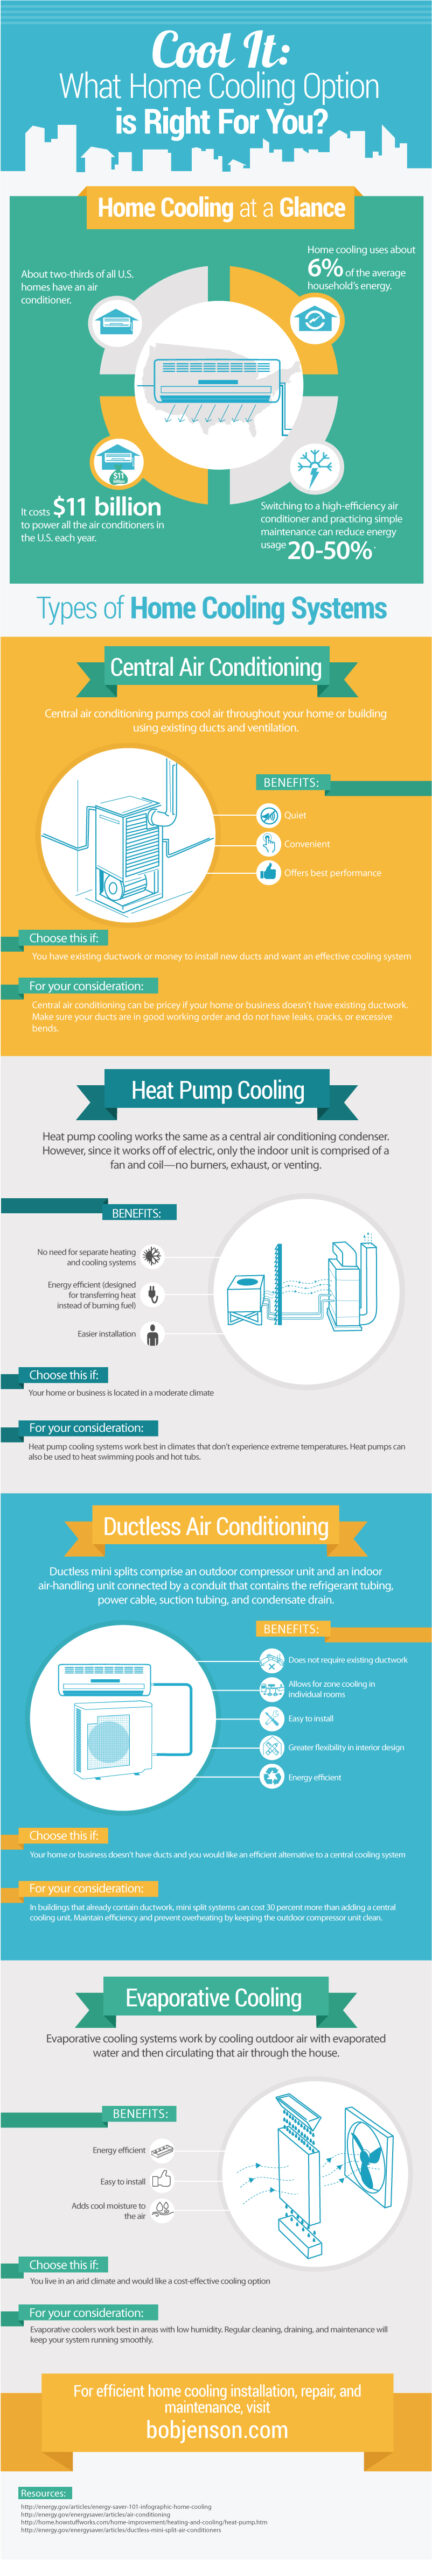 Infographic showing different cooling options and the benefits of each type